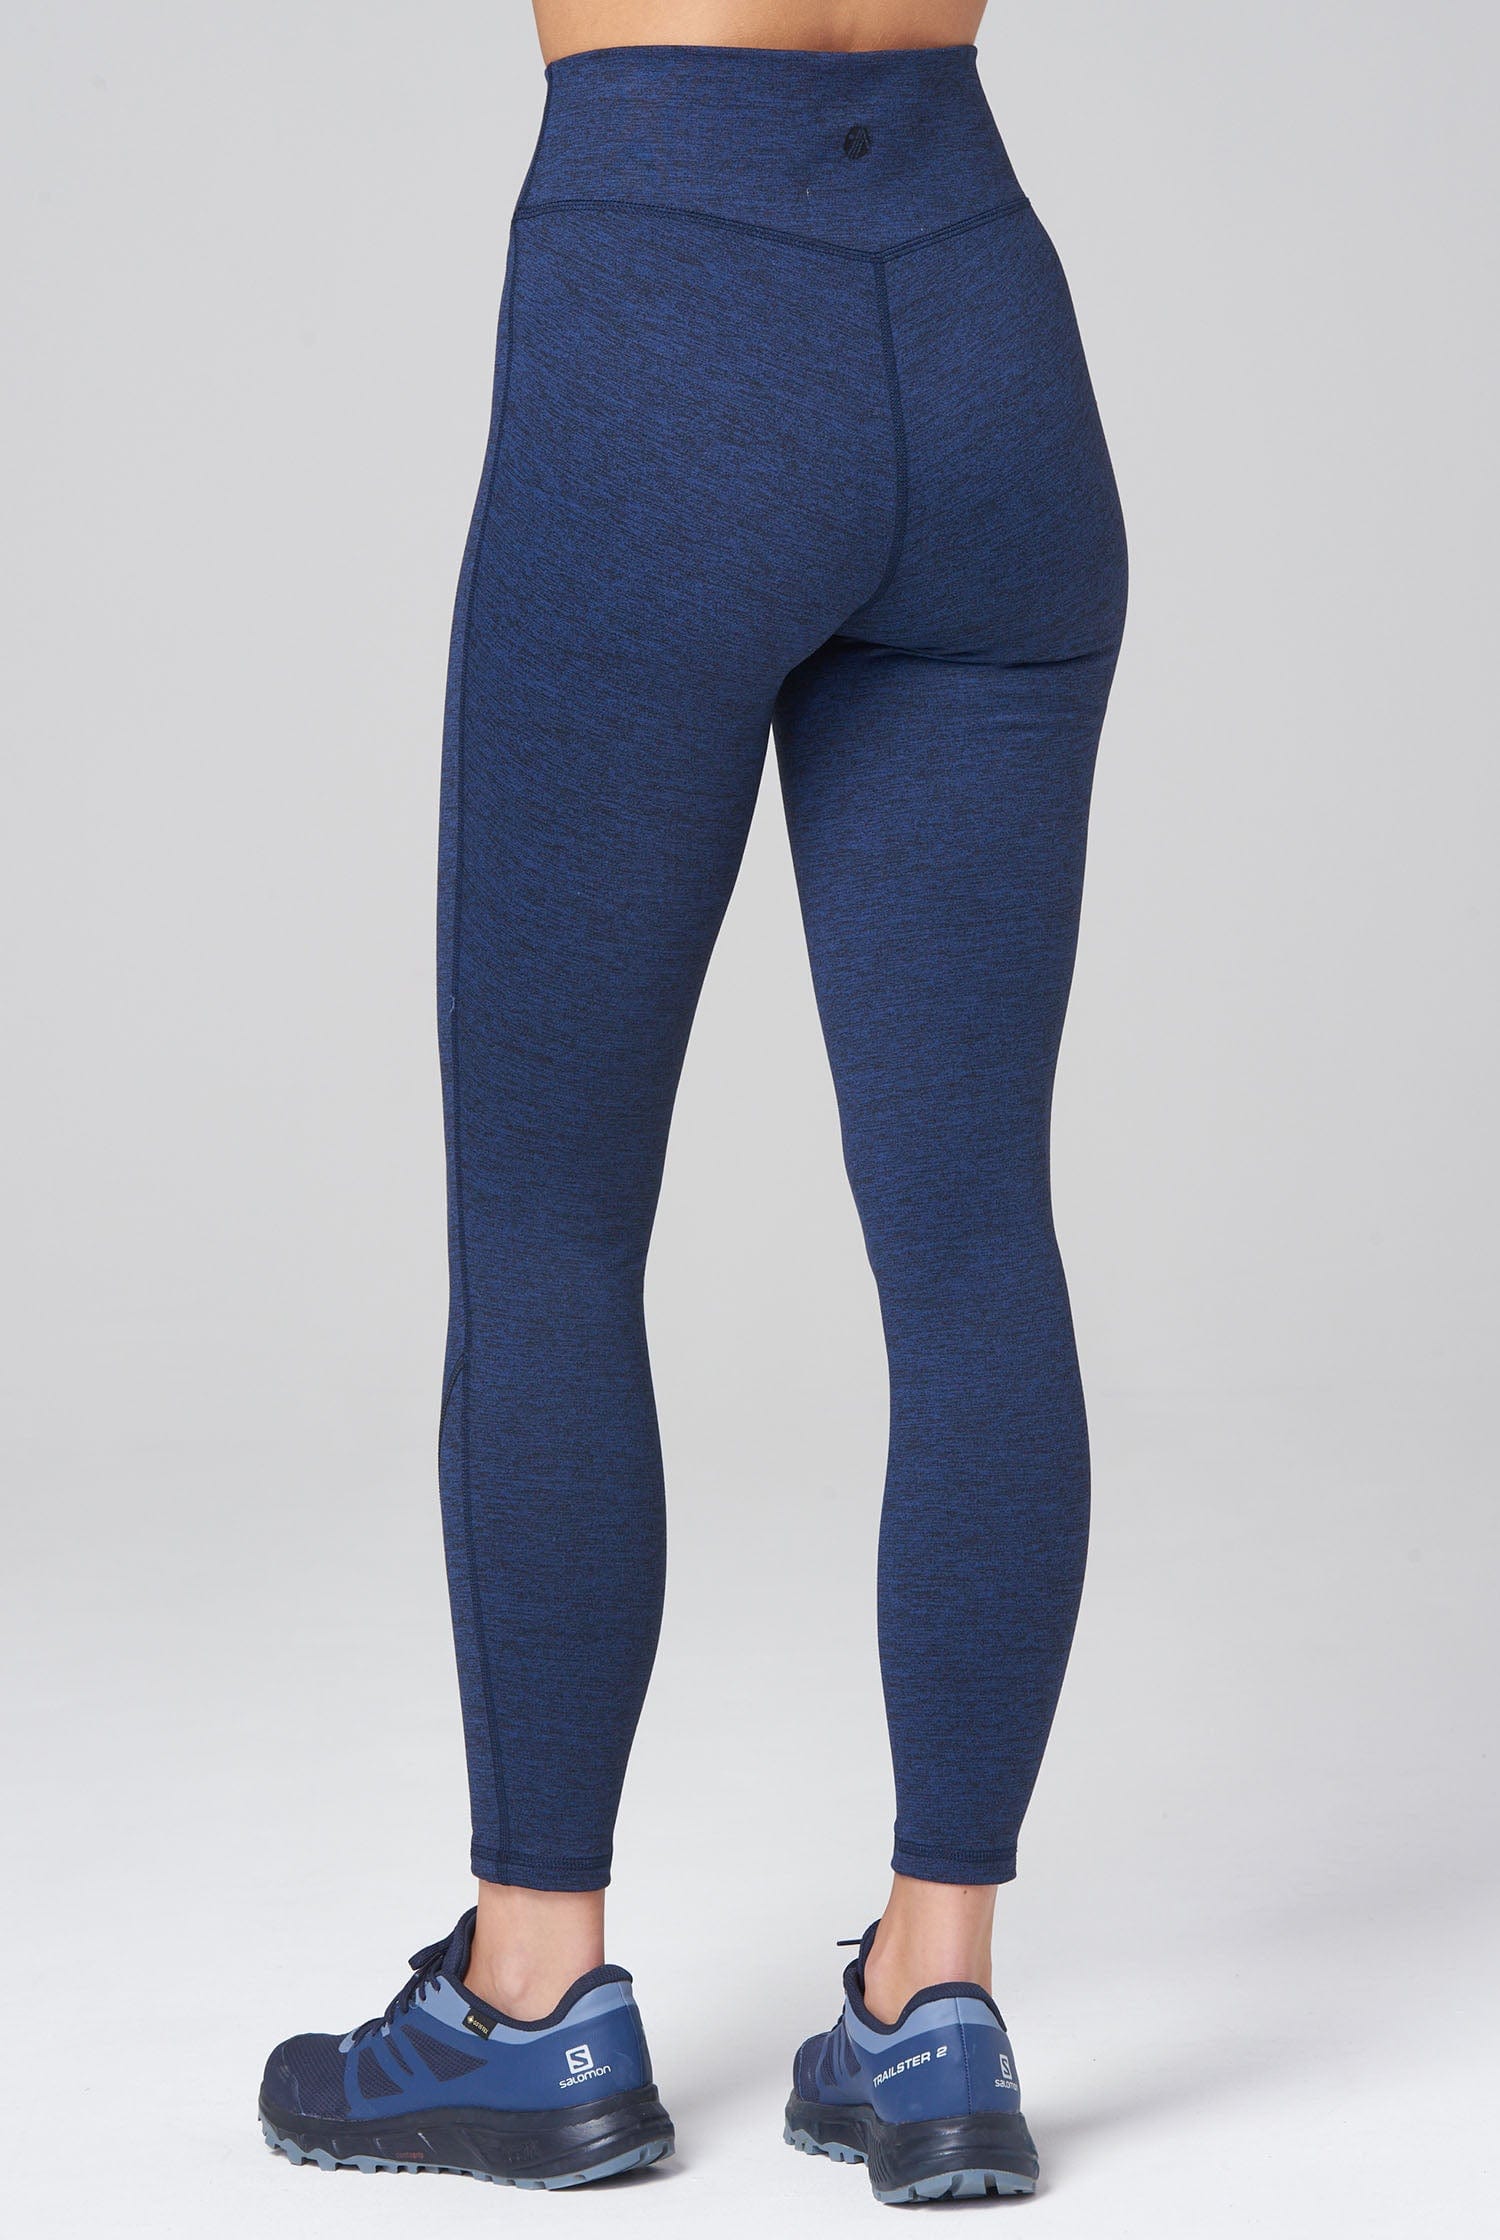 Buy Navy 2 Pack Thermal Leggings from Next Poland